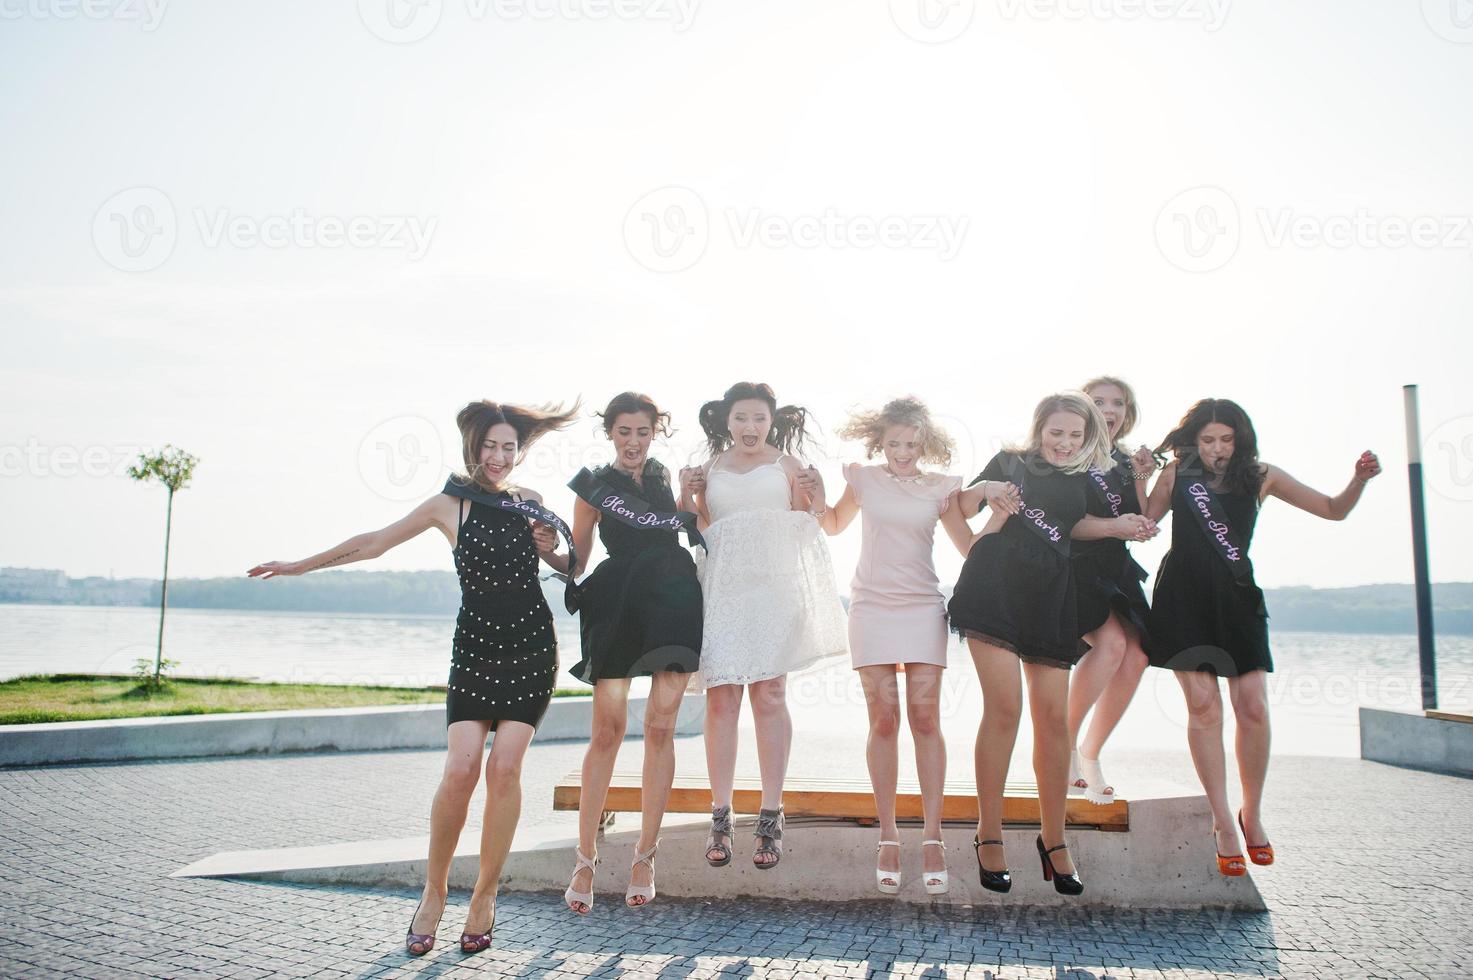 Group of 7 girls wear on black and 2 brides jumping at hen party. photo